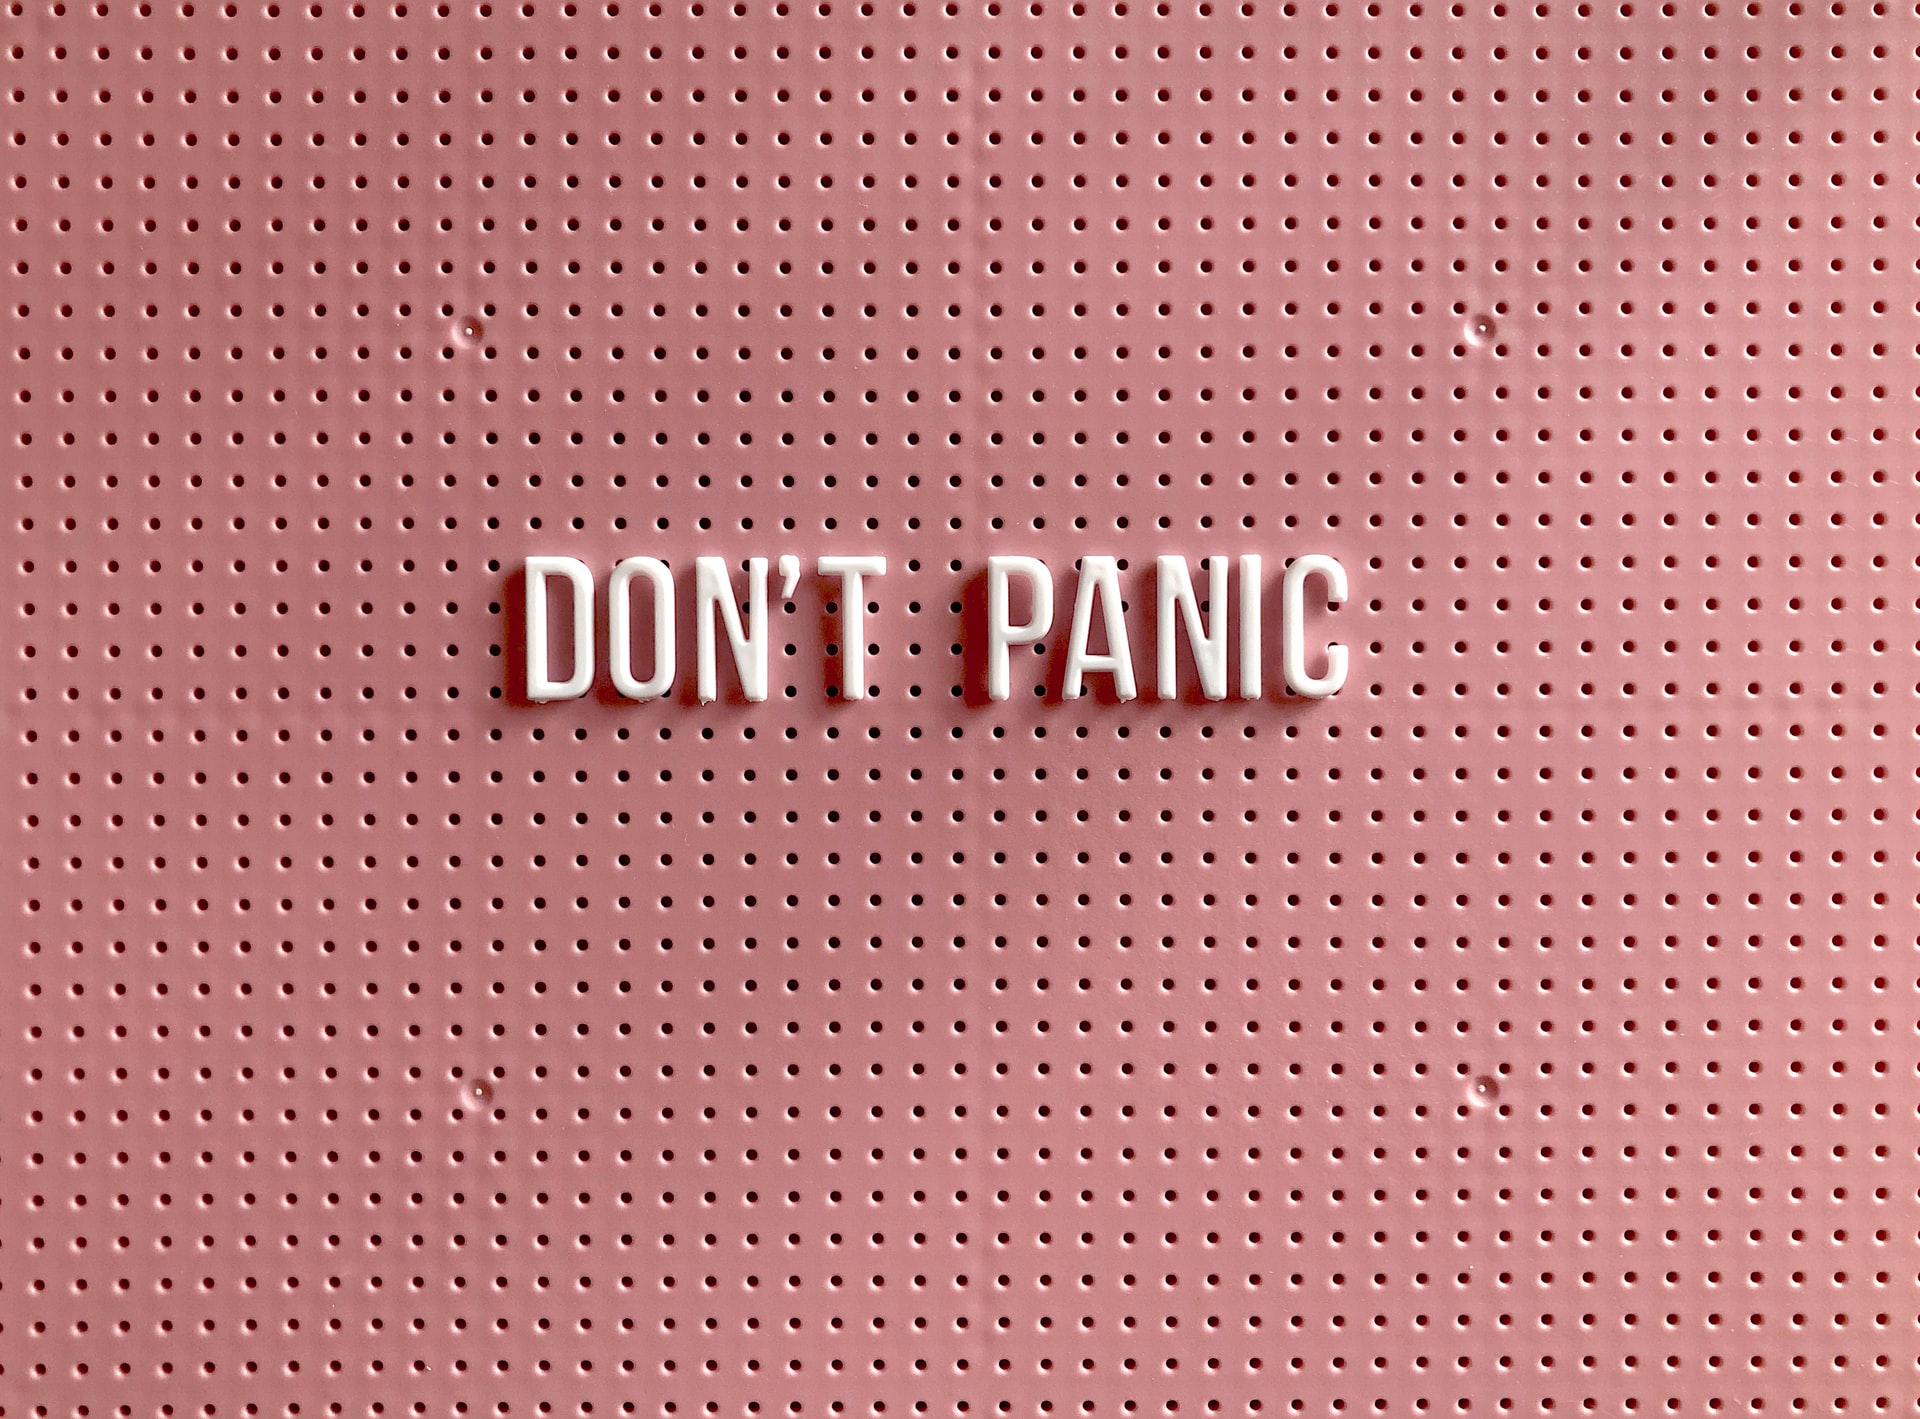 White letters on a board colored millennial pink that say DON'T PANIC